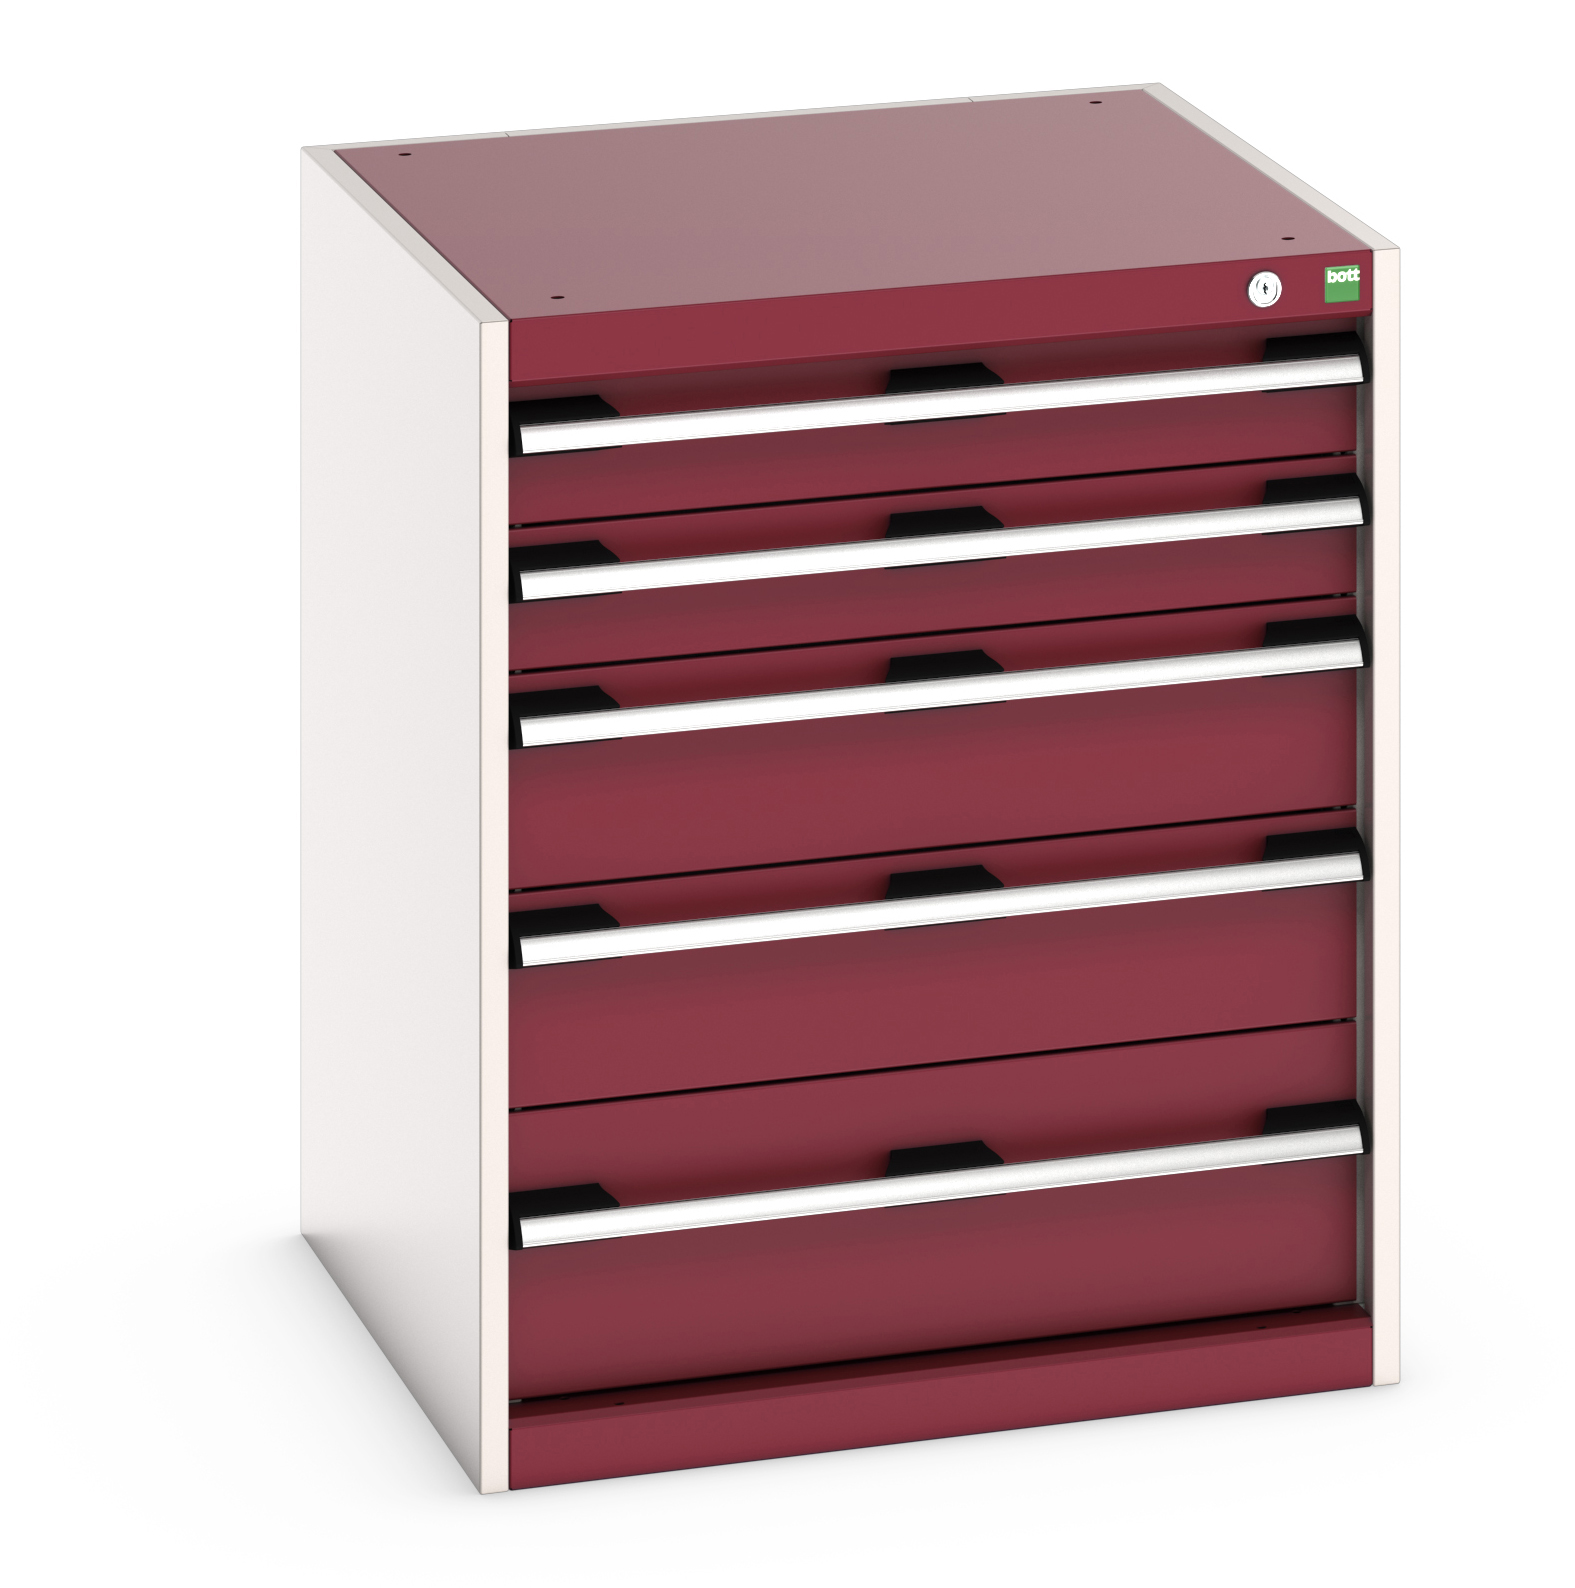 Bott Cubio Drawer Cabinet With 5 Drawers - 40019035.24V